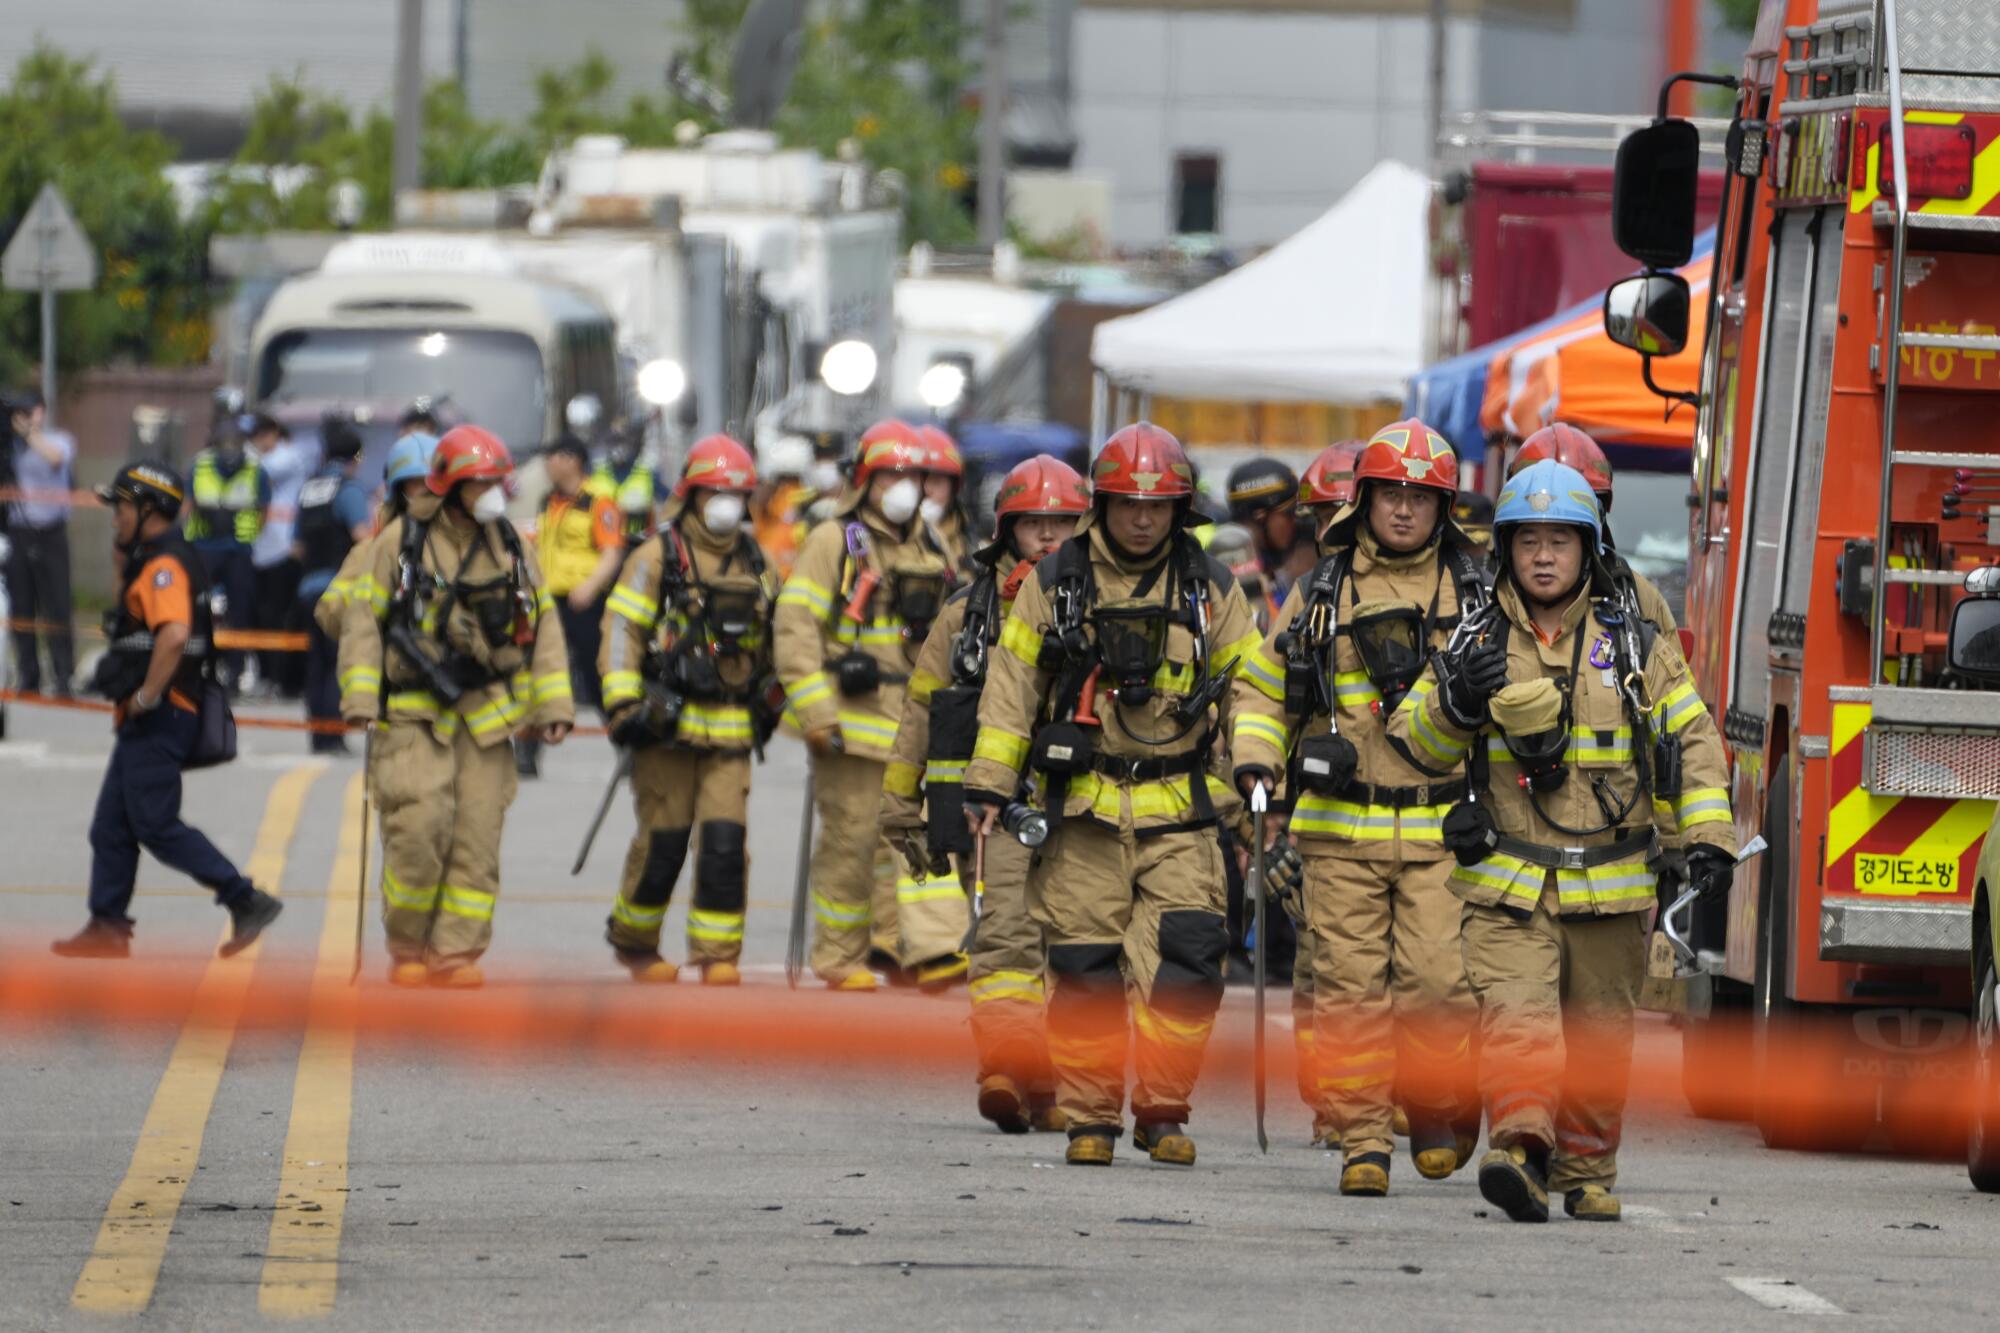 A line of firefighters in protective gear approaches the camera.